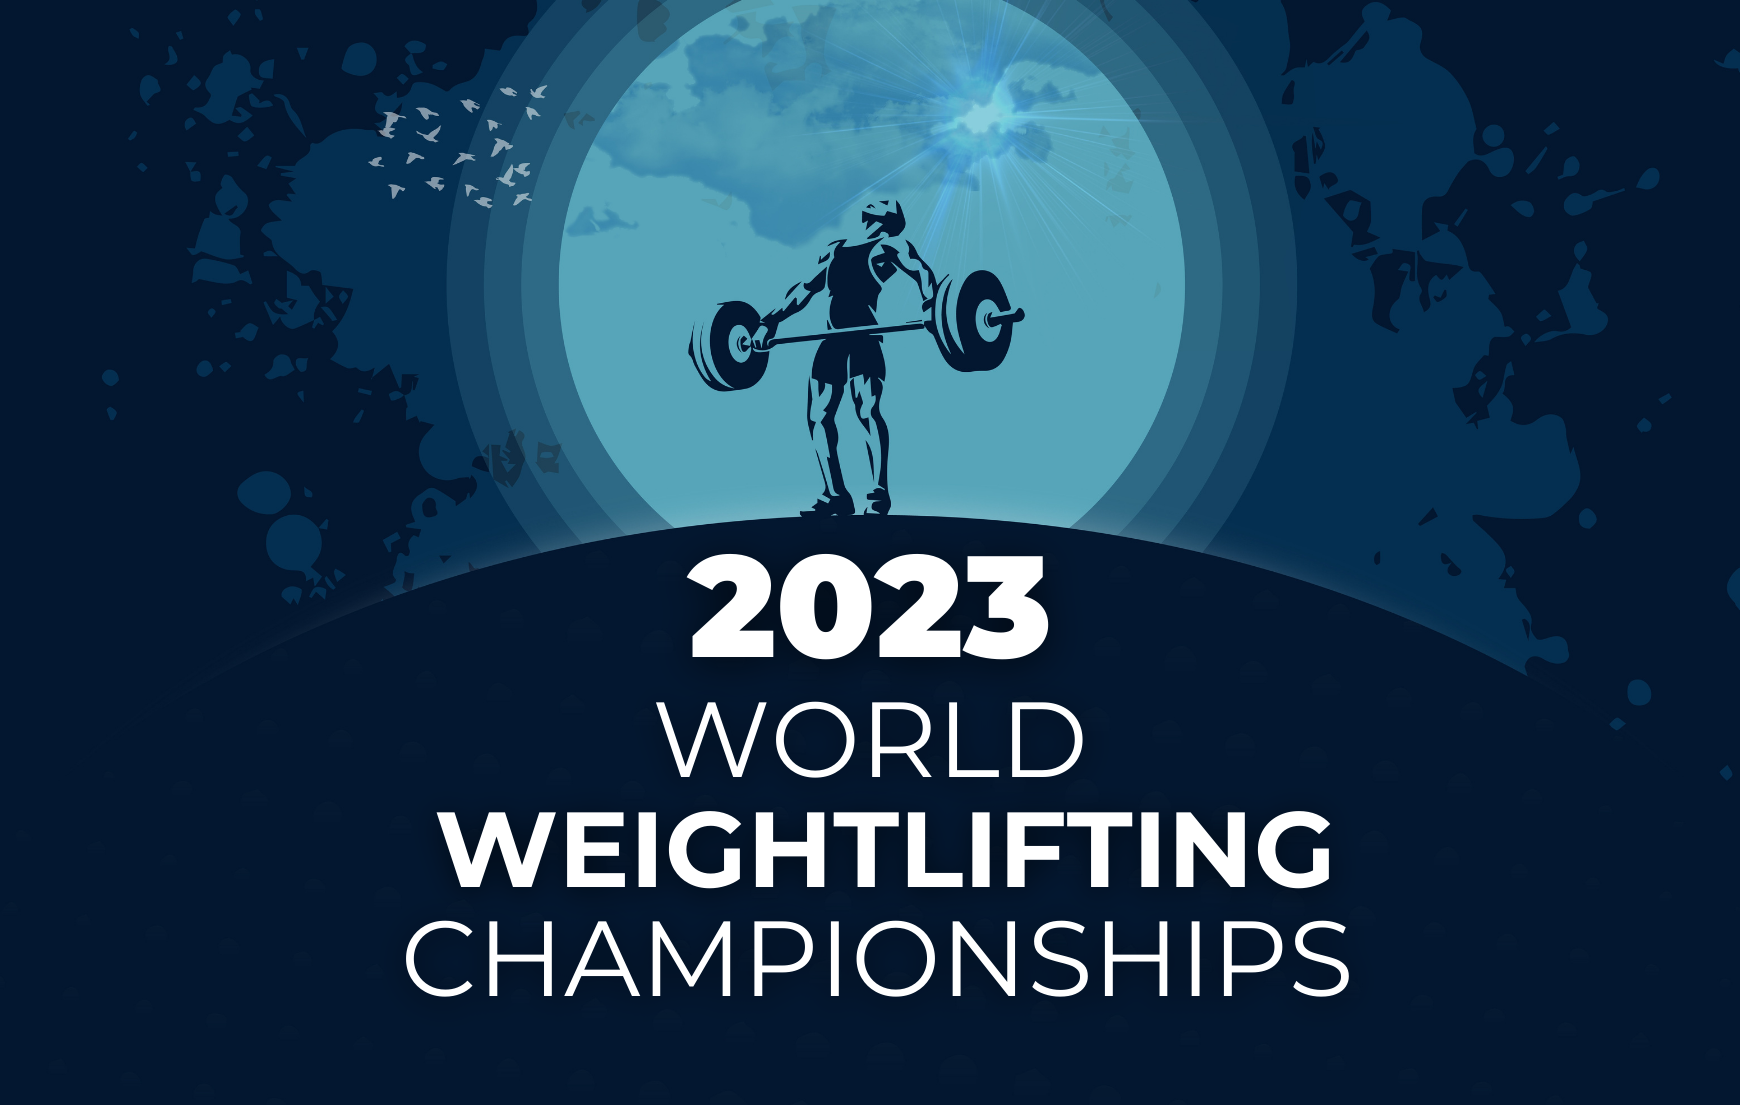 2023 WORLD WEIGHTLIFTING CHAMPIONSHIPS